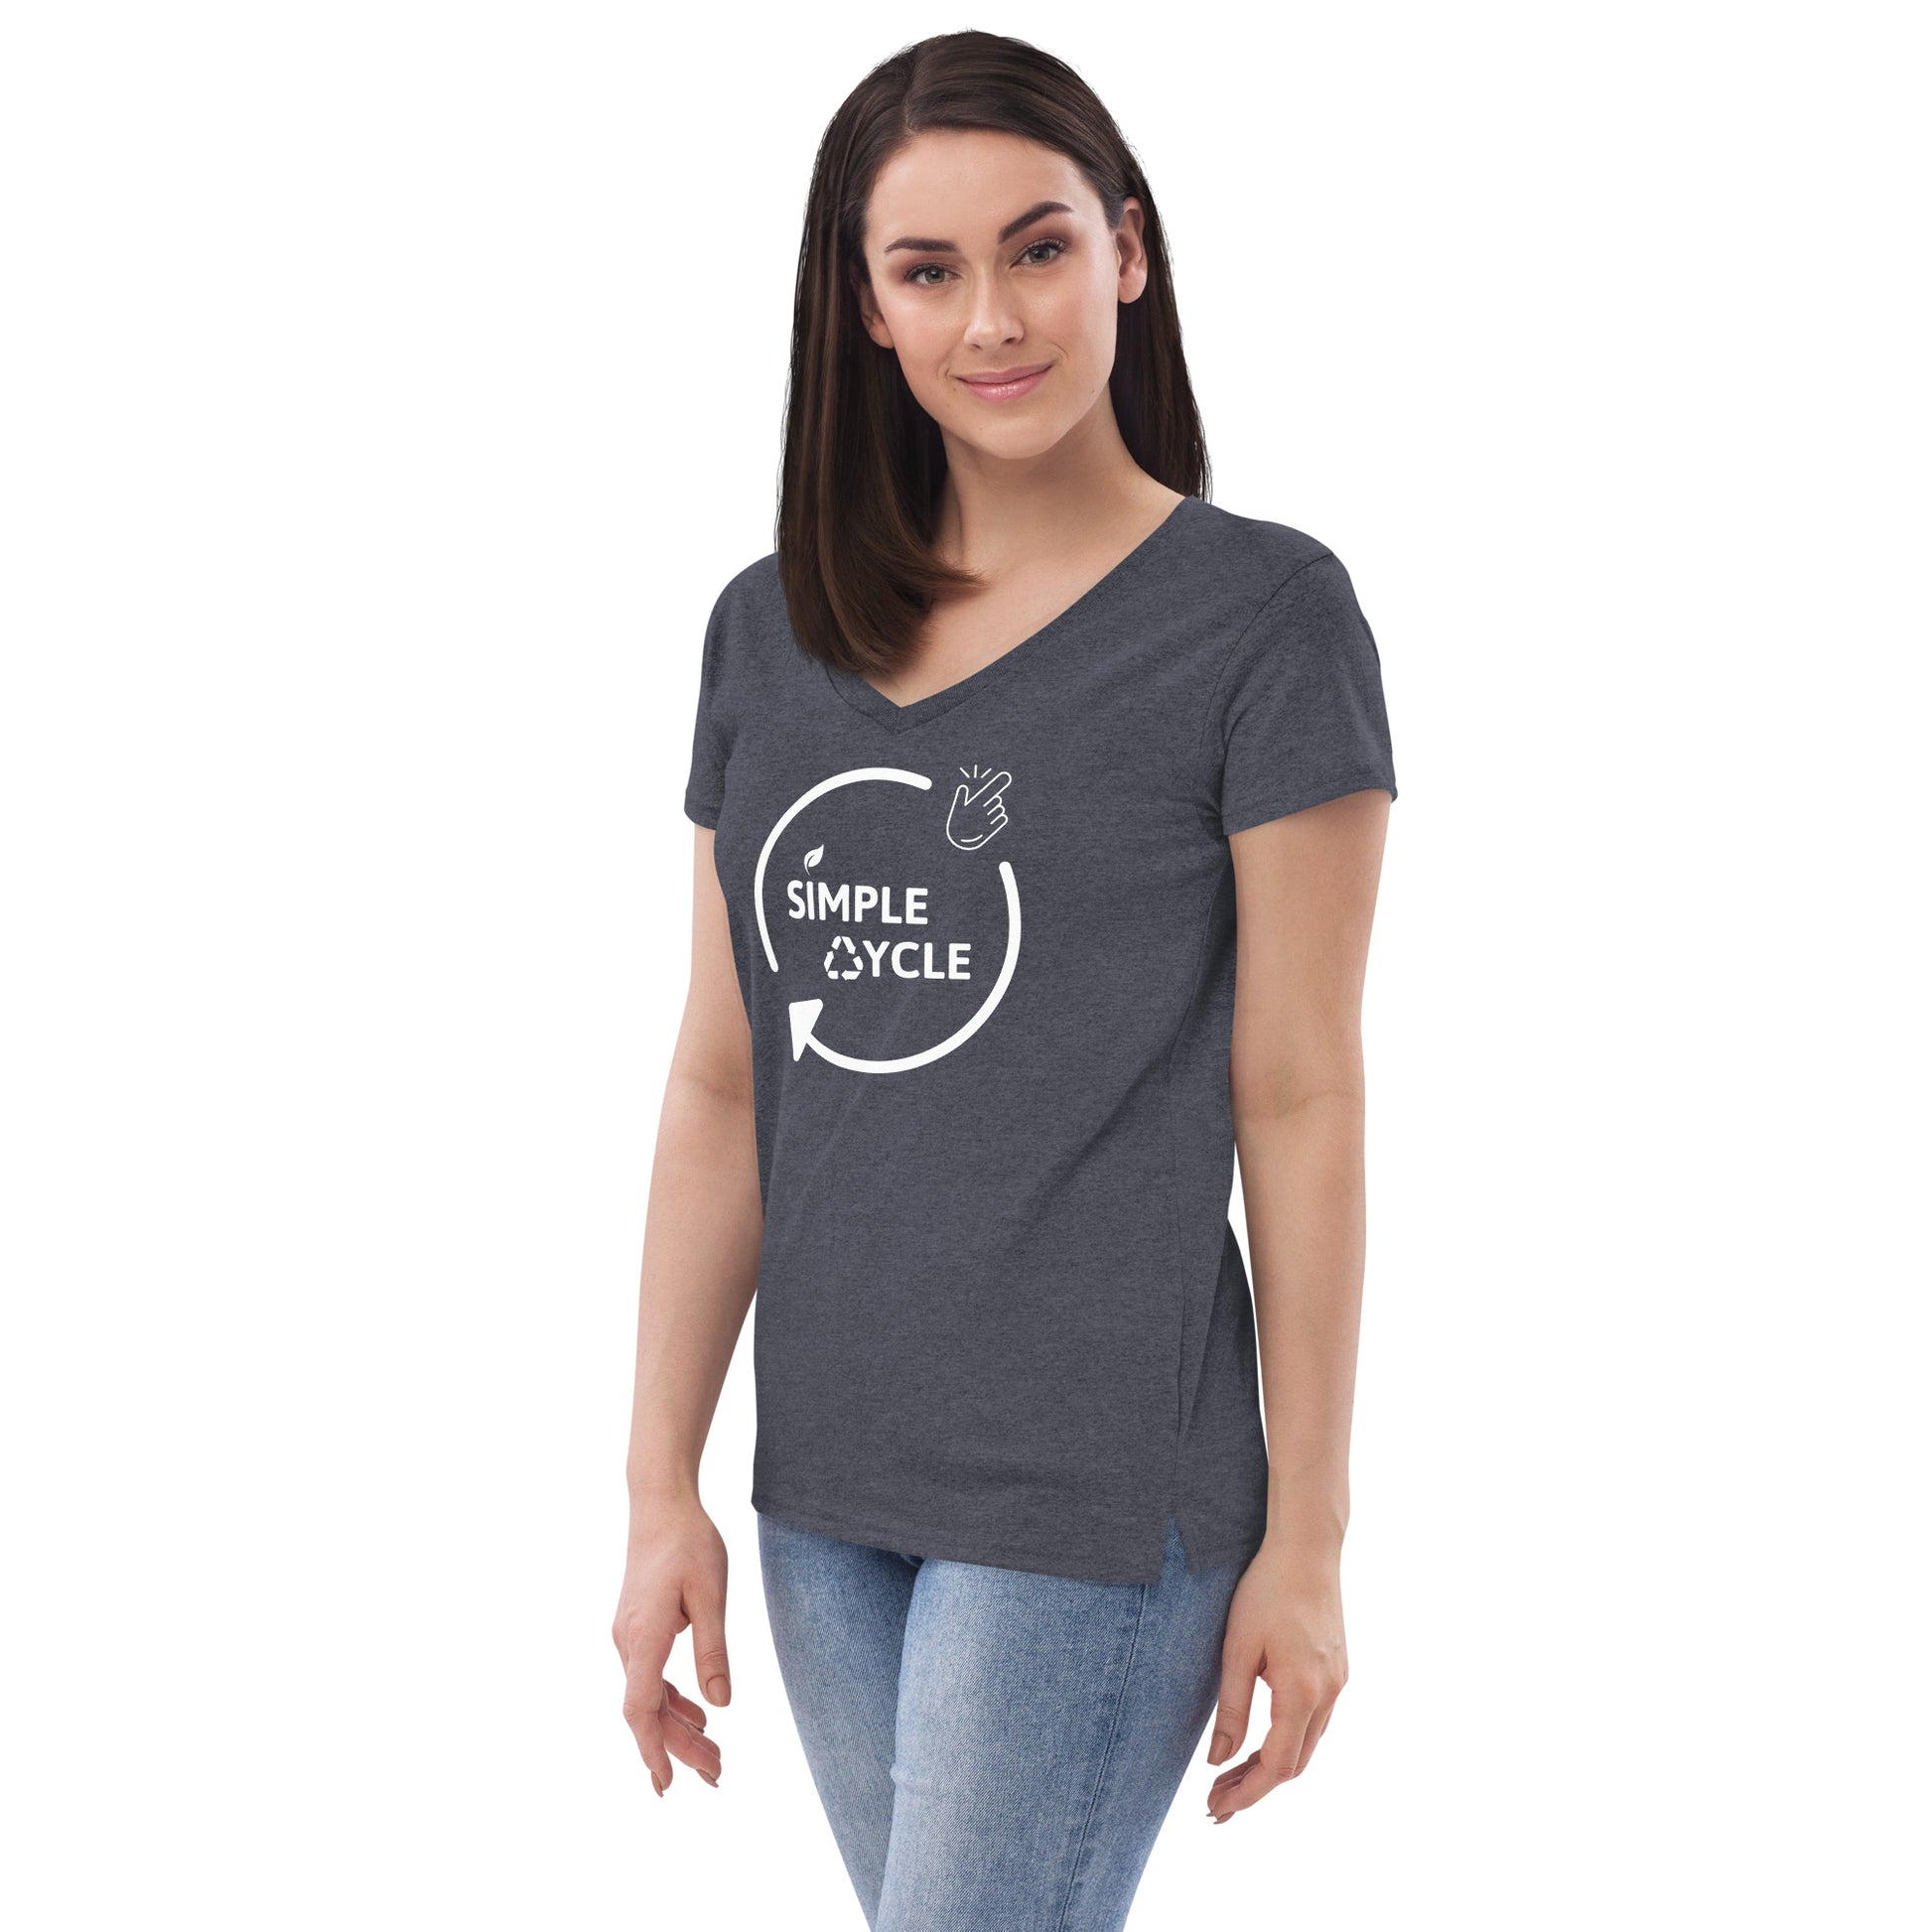 SimpleCycle Women’s Recycled V-Neck T-Shirt heather navy side view